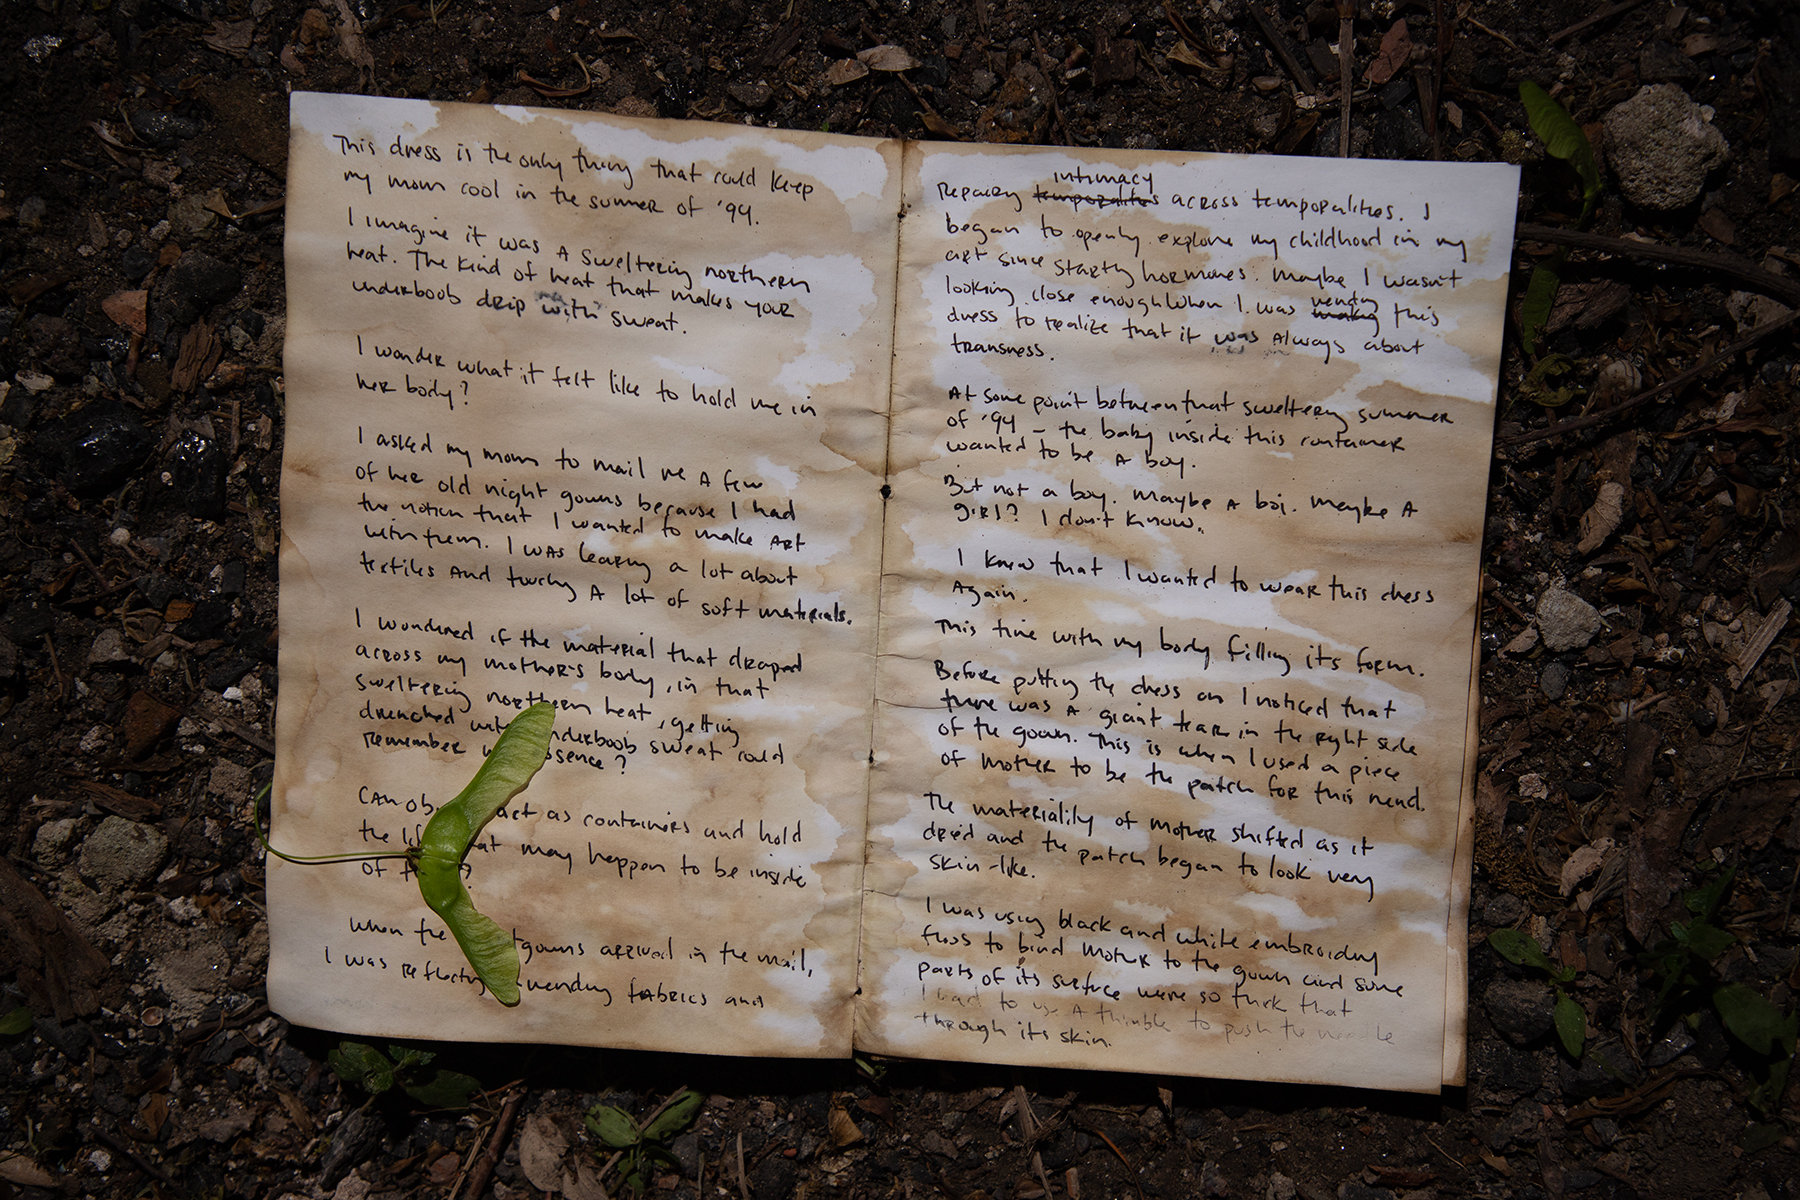 A hand-written diary laying on dirt and is opened directly to the middle of the diary. 